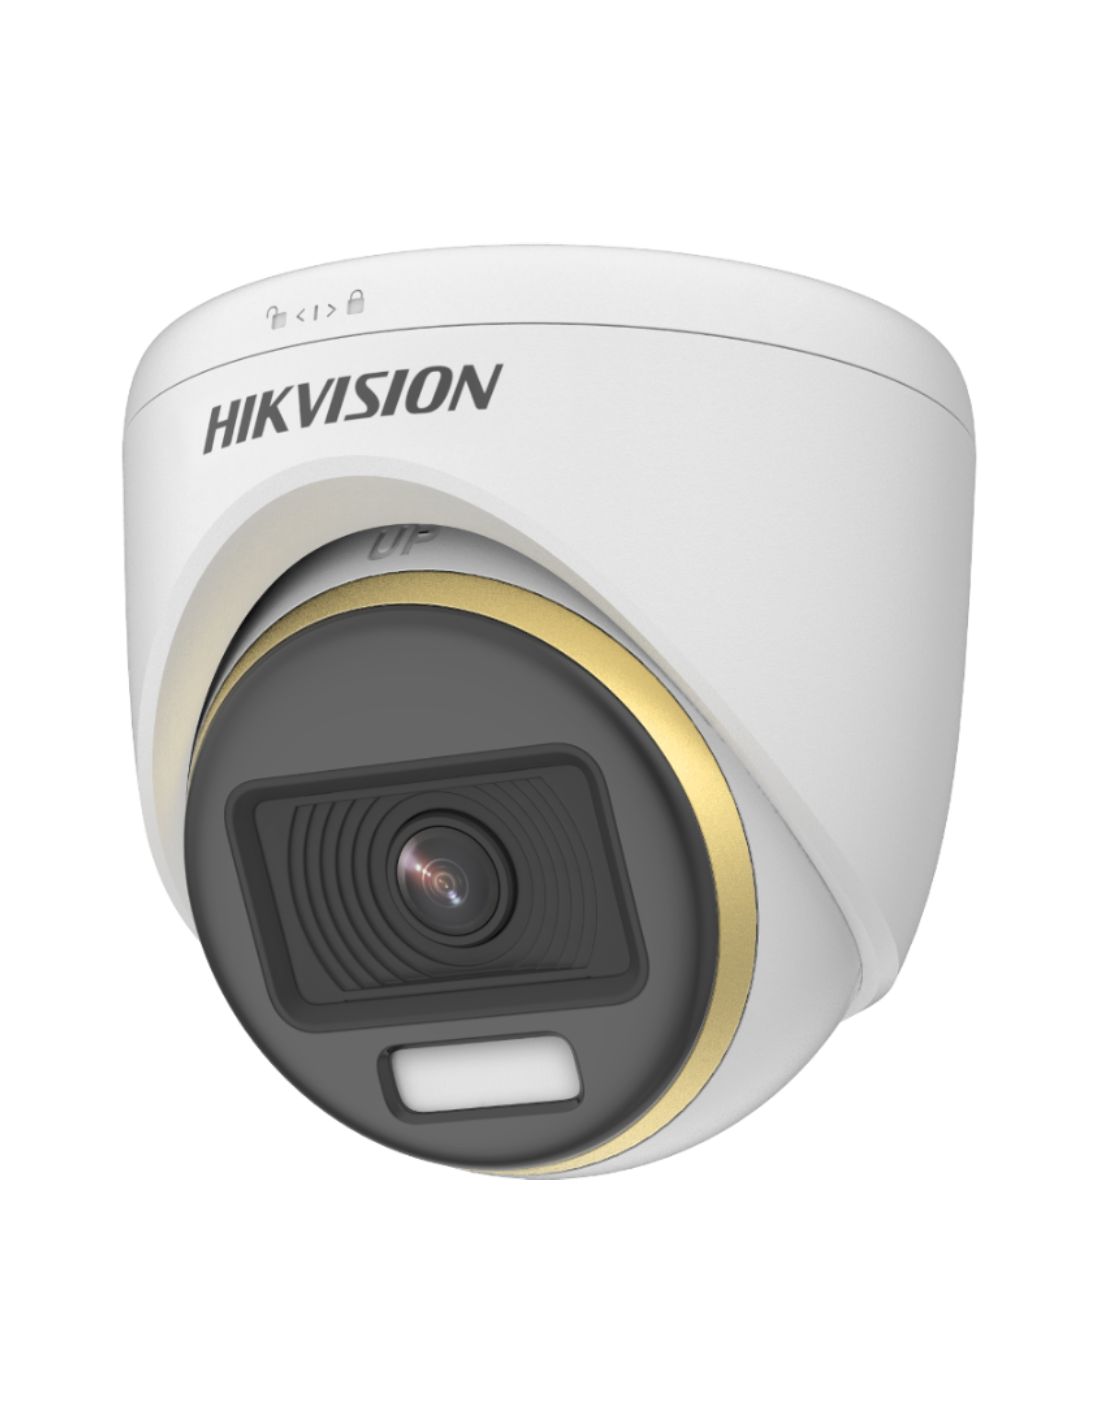  HIKVISION DS-2CE70DF3T-MFS | 2MPX | MICROFONO | COLORVU | DOMO | 2.8MM | METALICA | EXTERIOR | 20MTRS IR | FULL